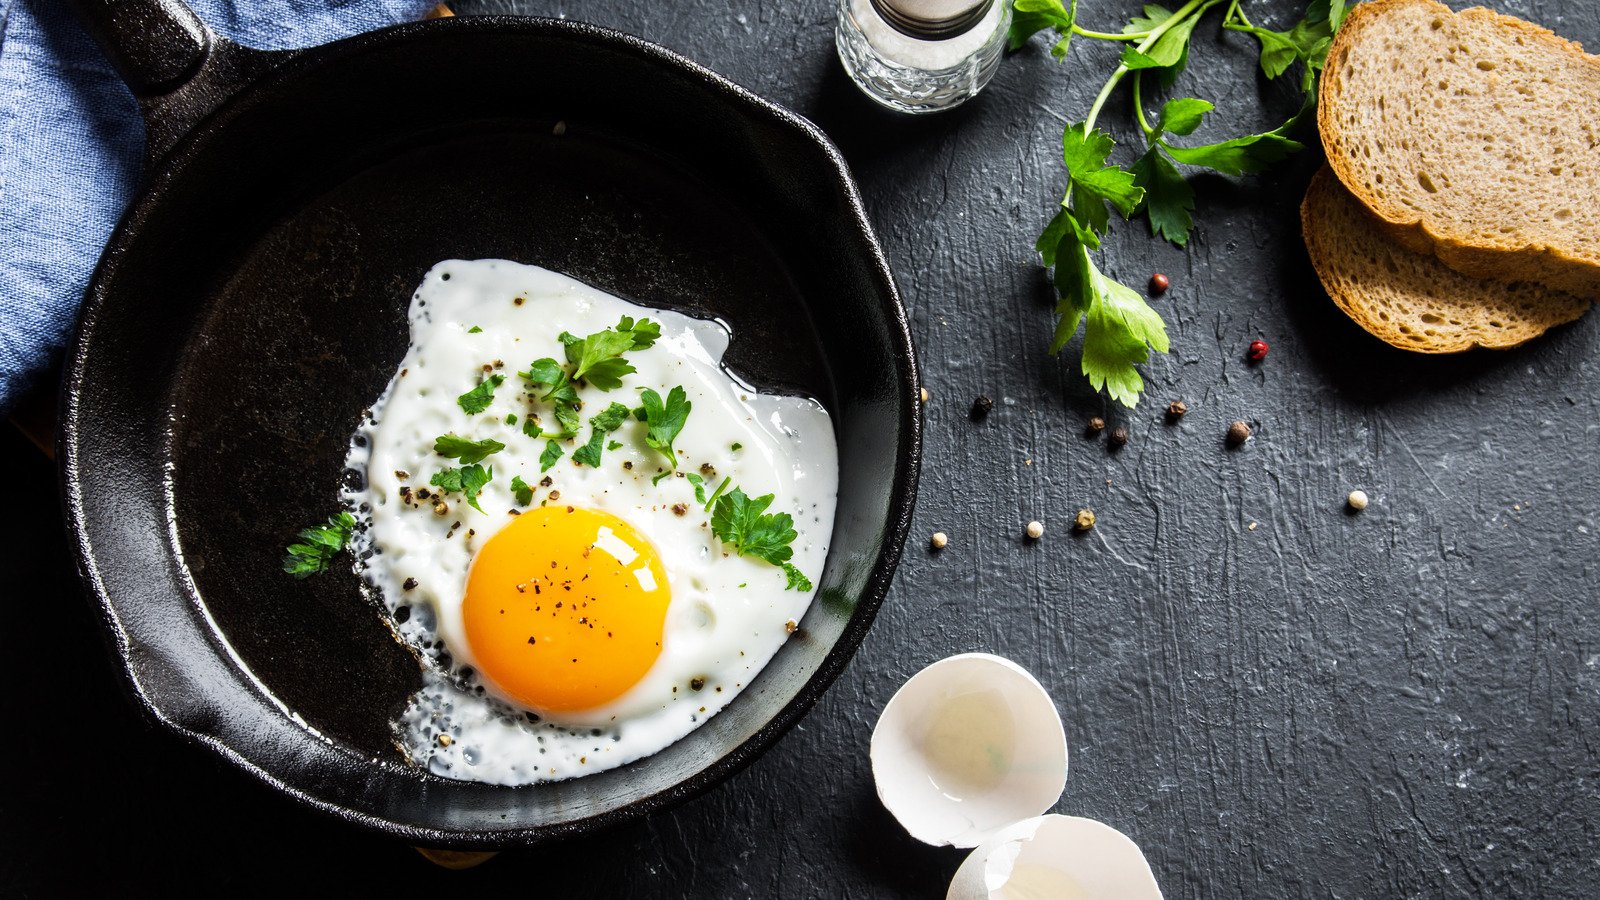 Big Mistakes Everyone Makes When Frying Eggs